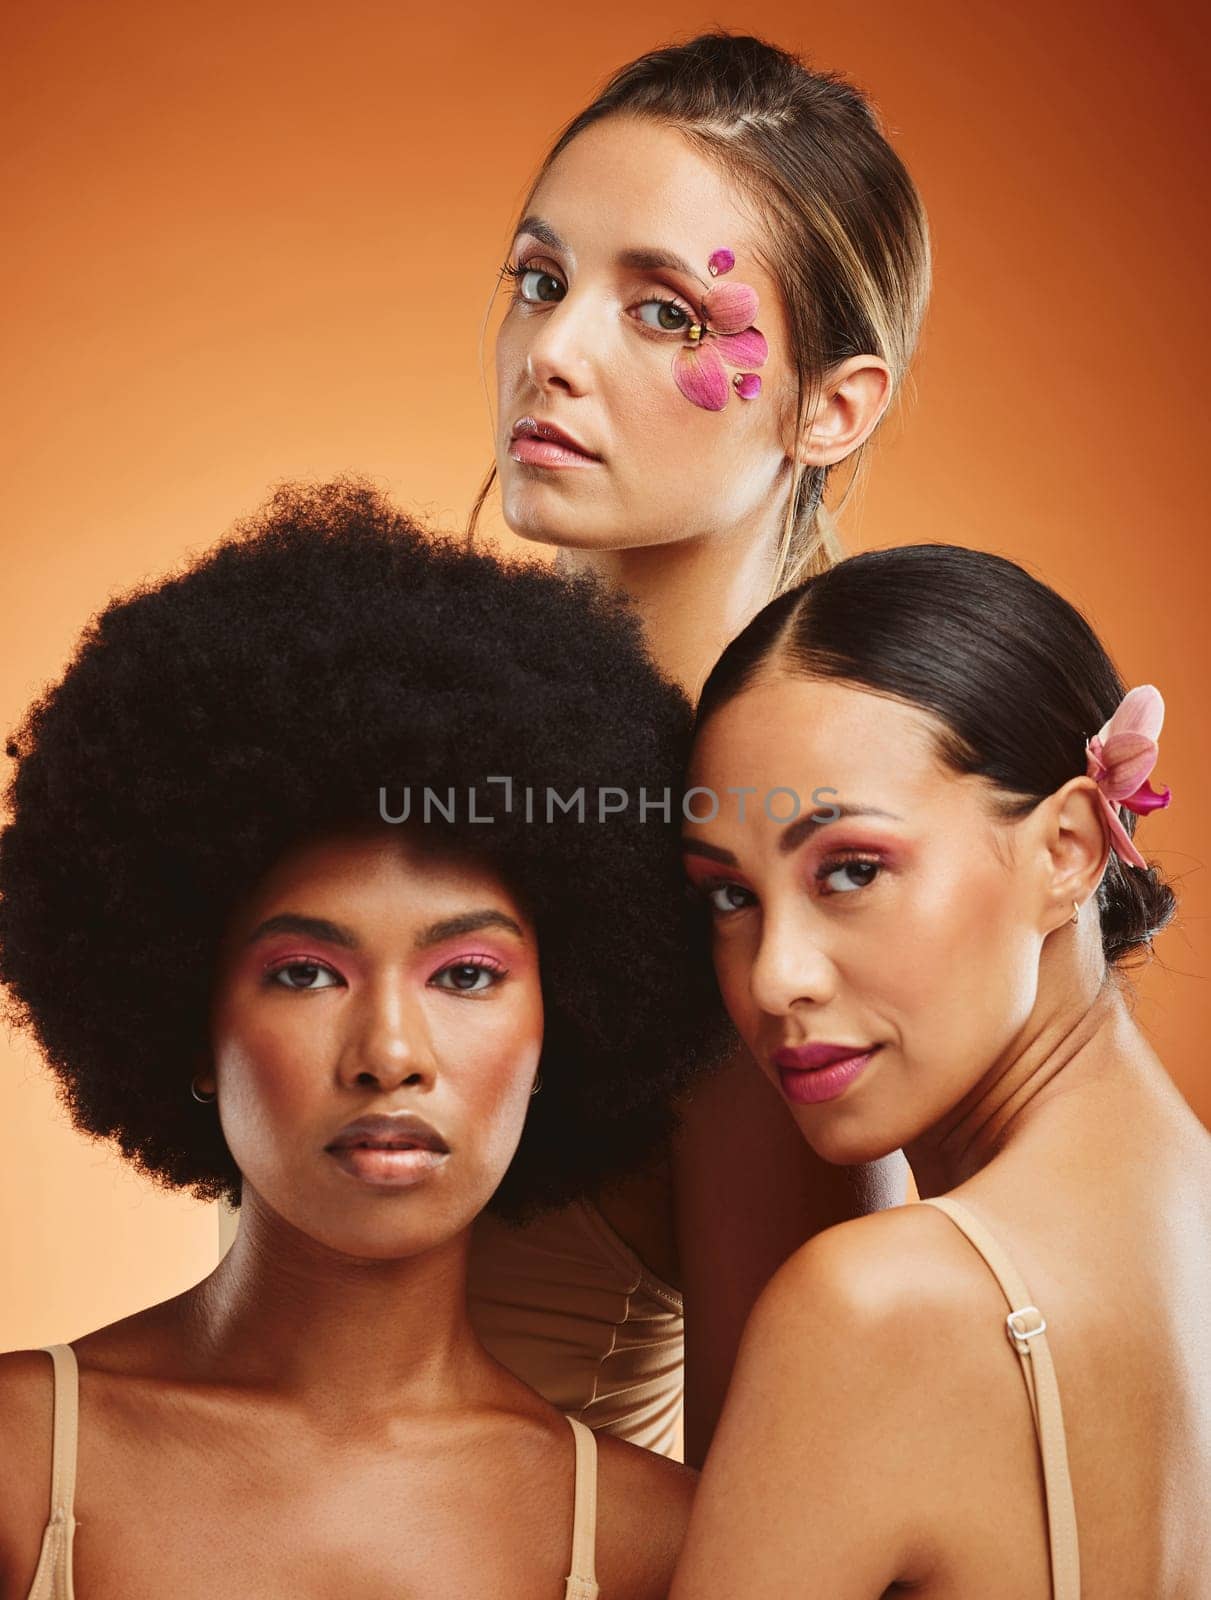 Portrait, flowers and women with makeup for spring against an orange mockup studio background. Face of model group with orchid plants for wellness, skincare beauty and body cosmetics for health.